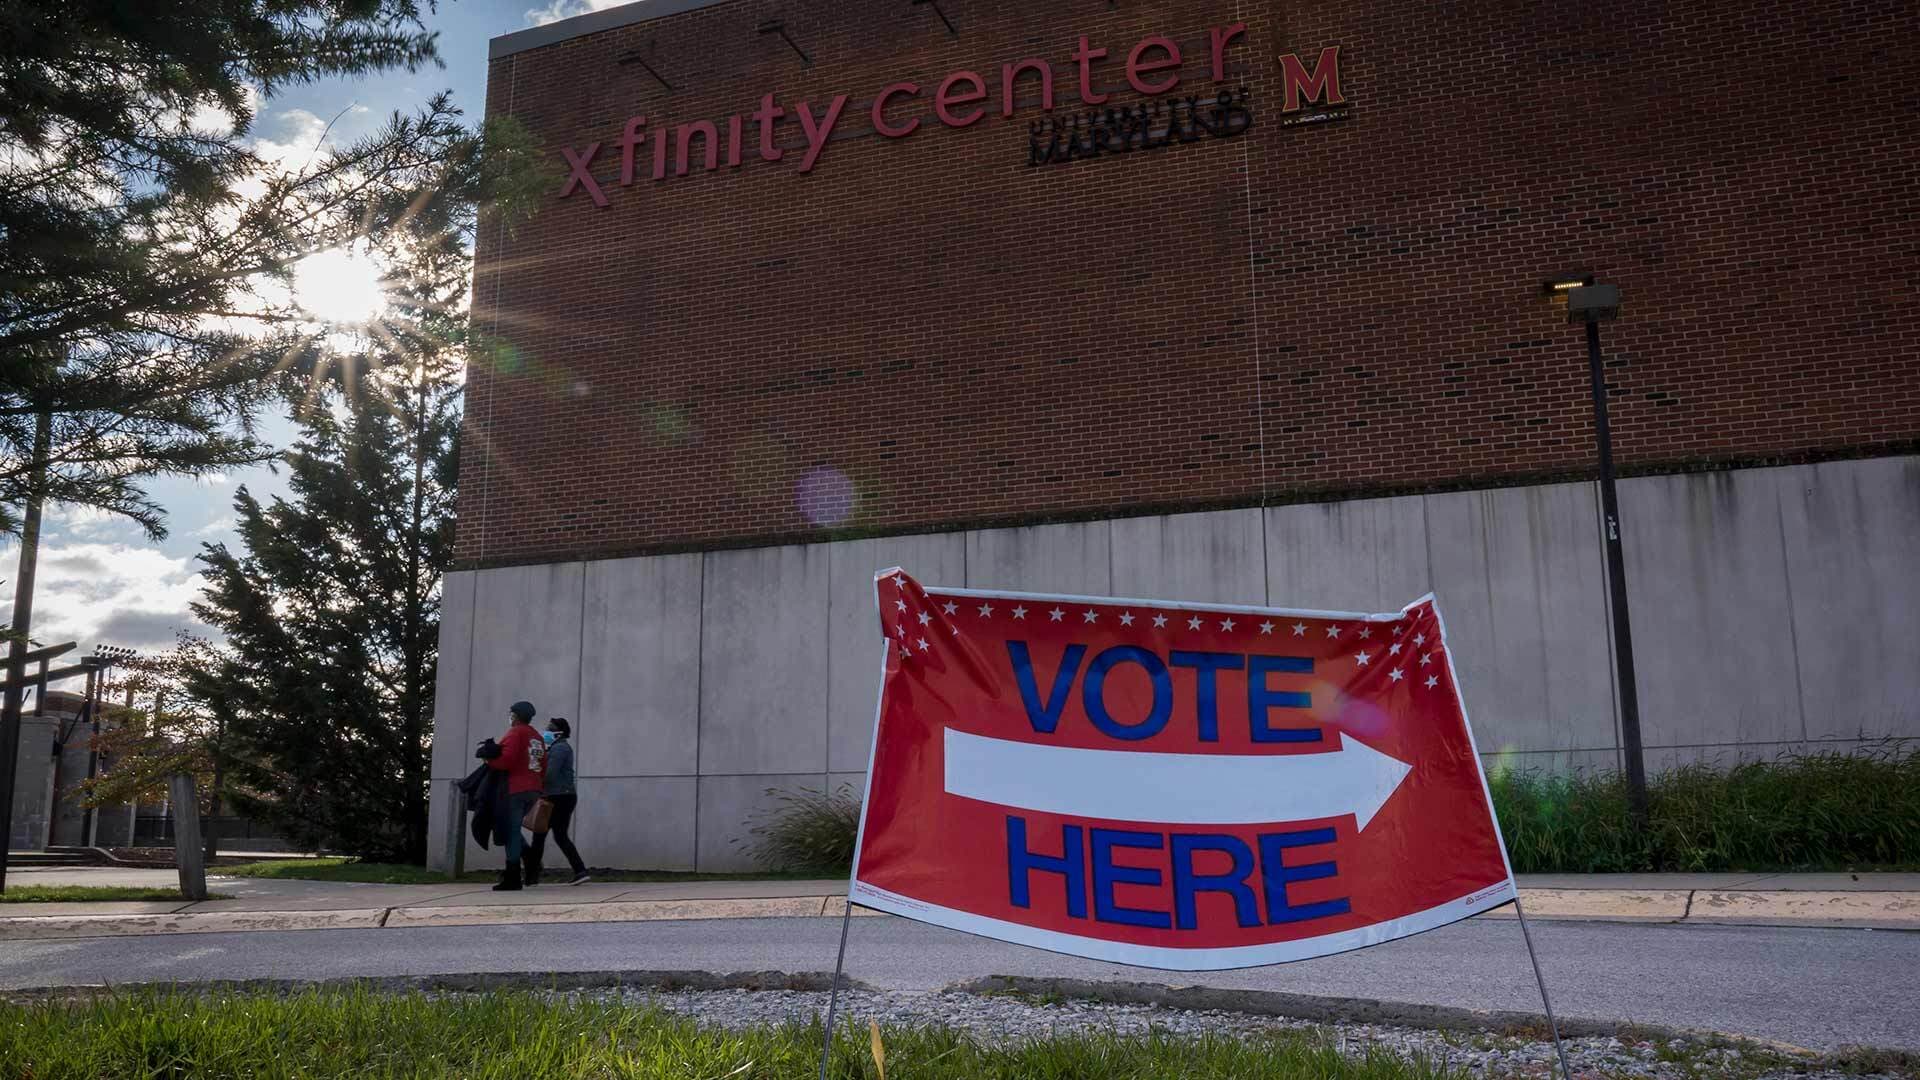 Sign outside Xfinity Center reading "VOTE HERE"